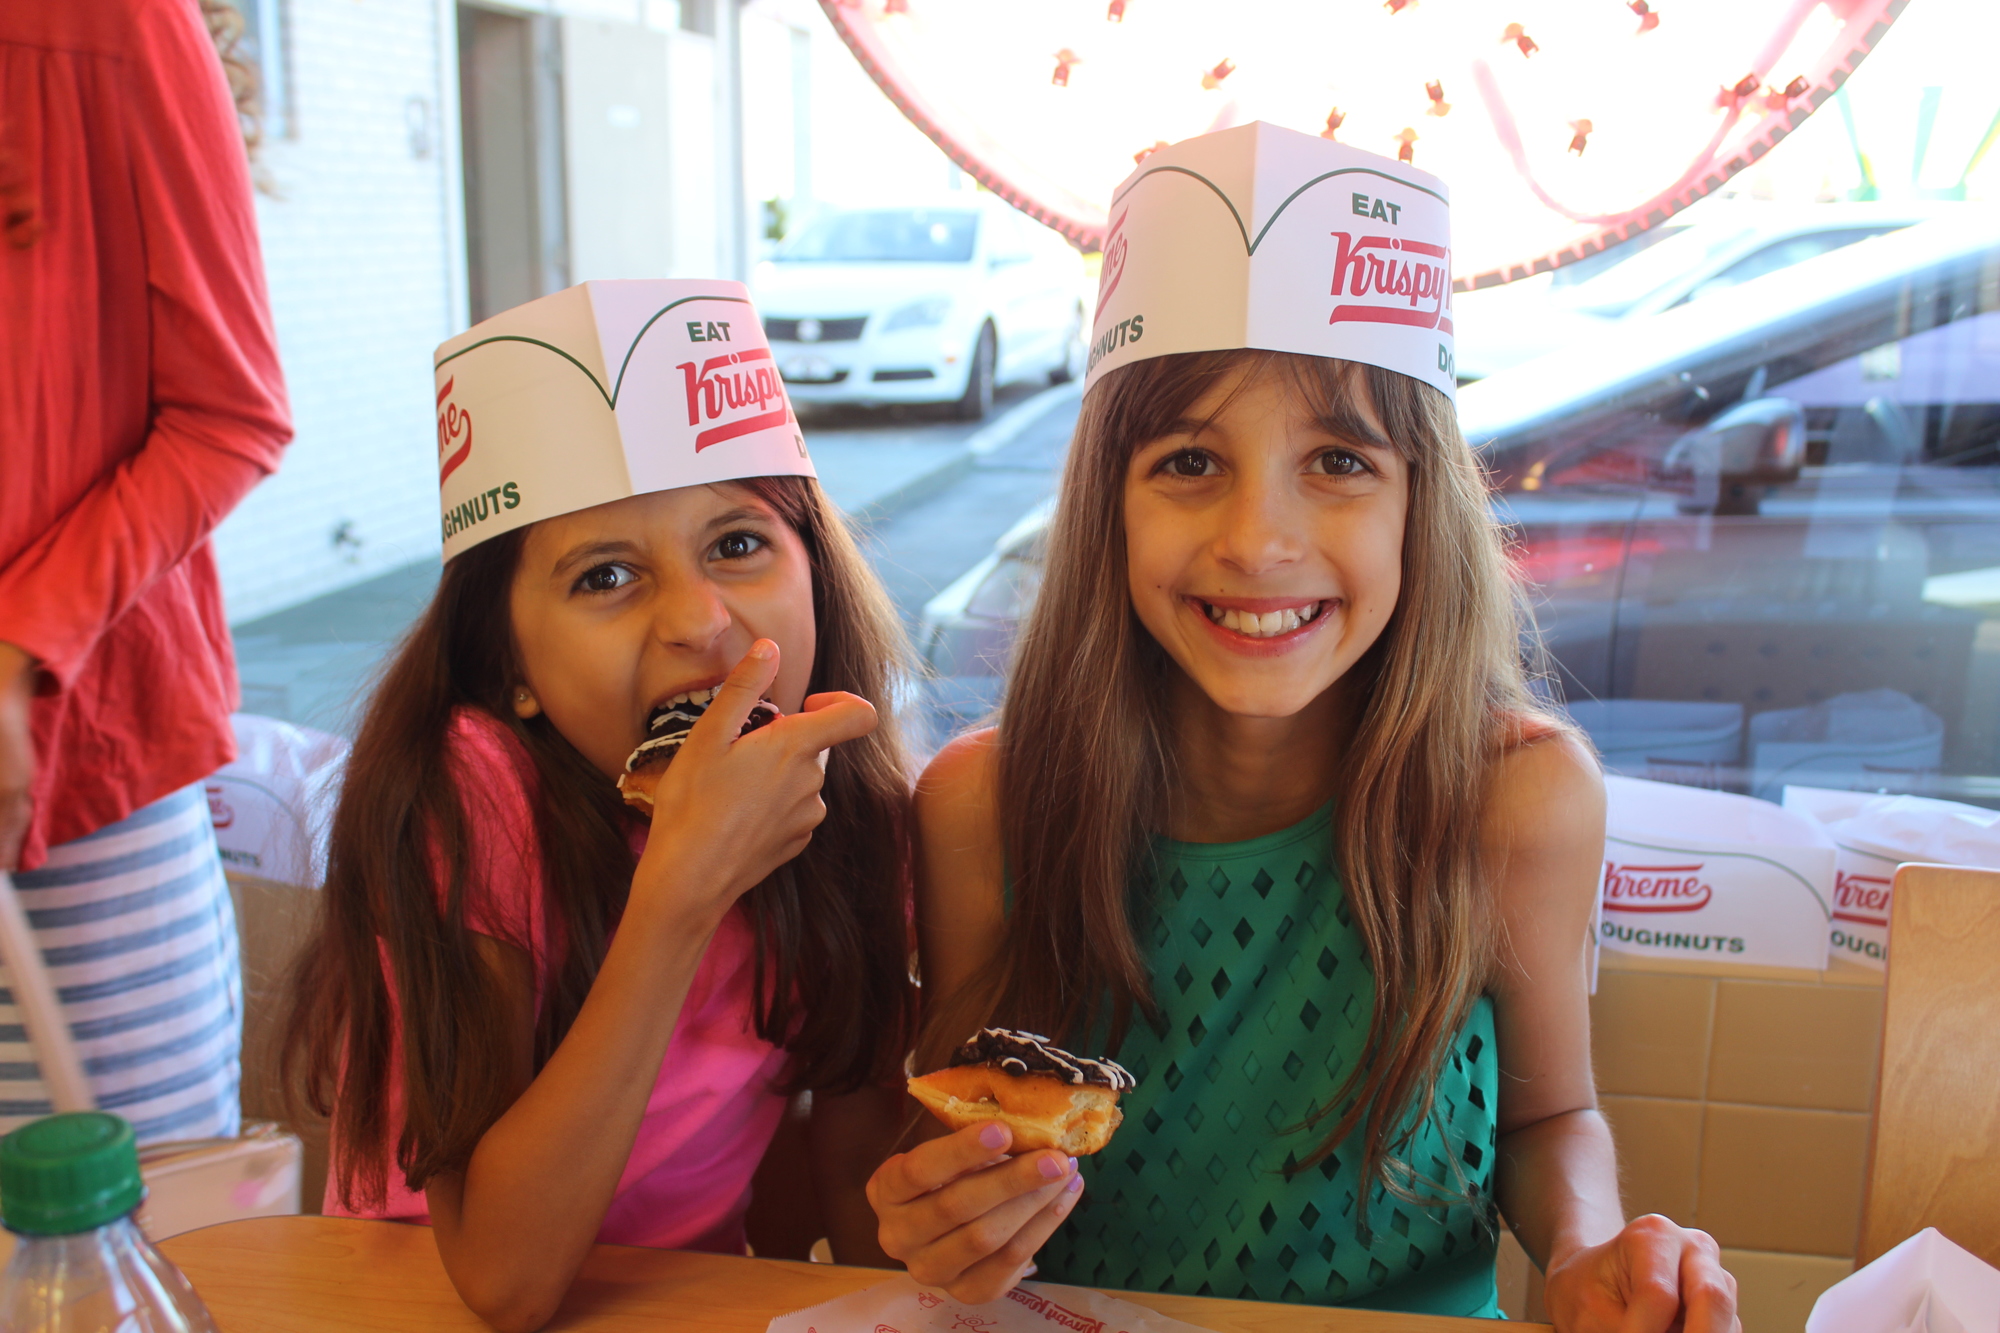 Eva Manley, 8 and Lola Manley, 9 wasted no time sampling the donuts.